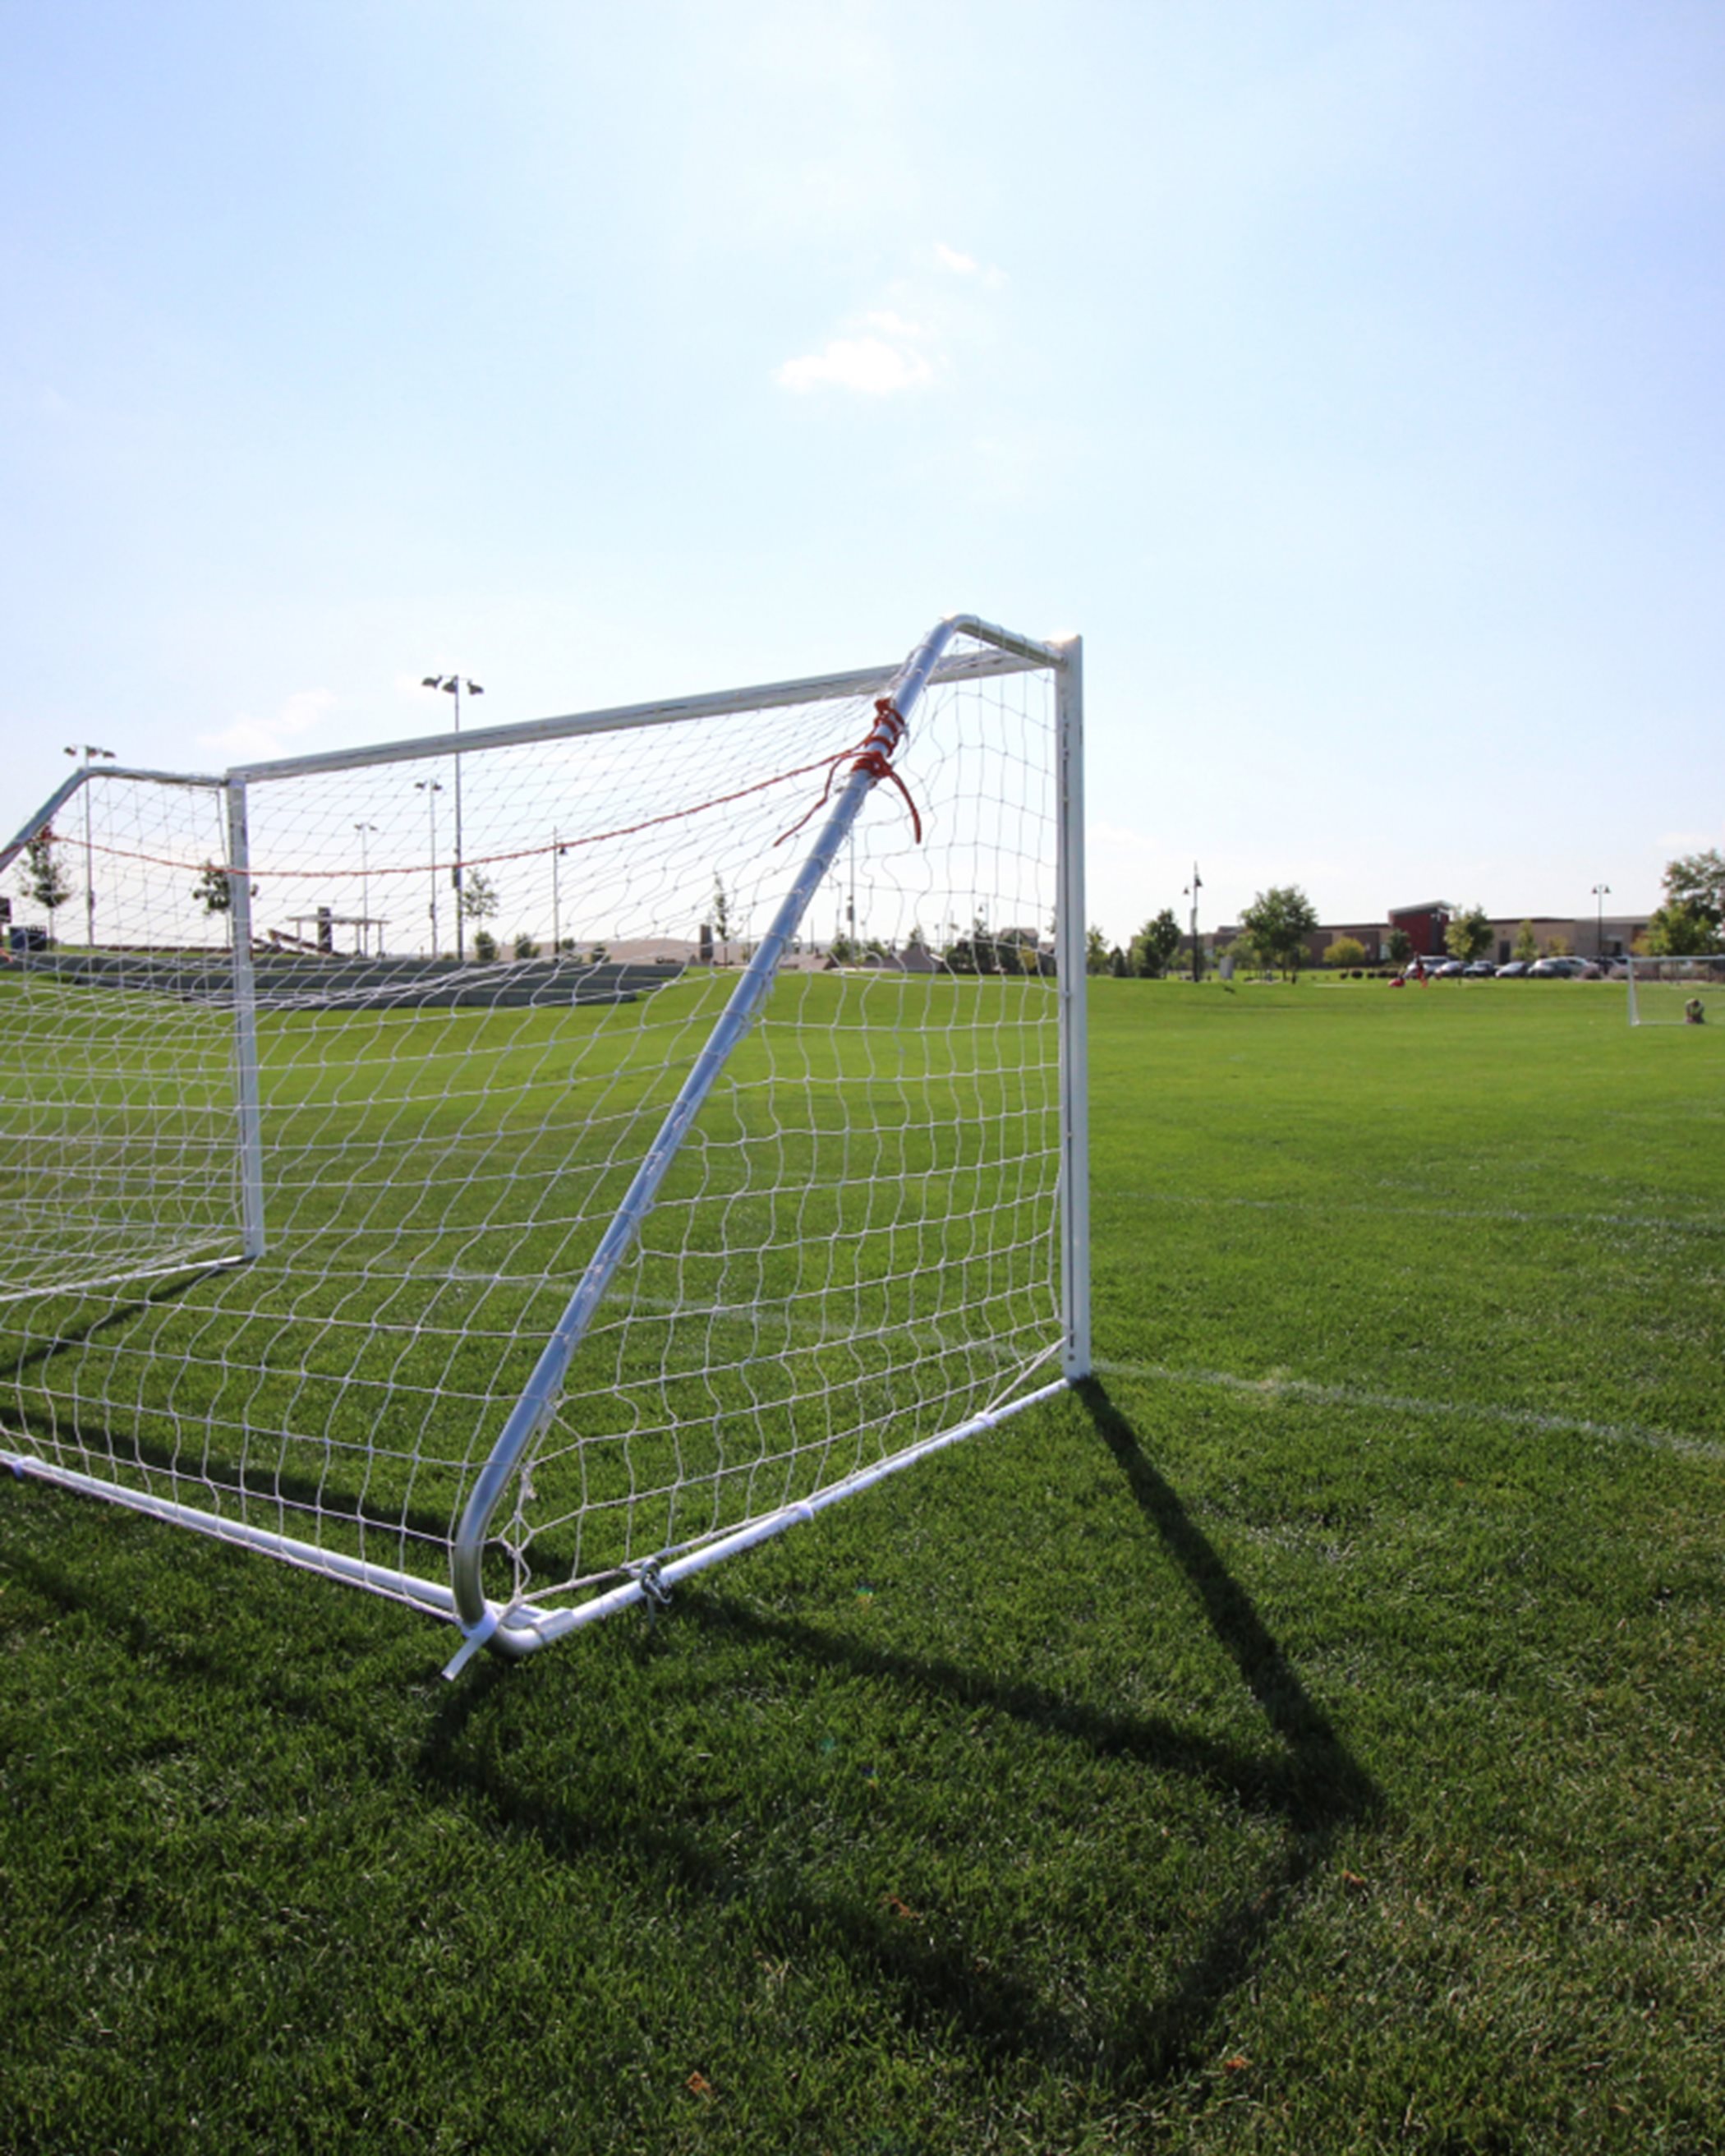 A soccer goal and field